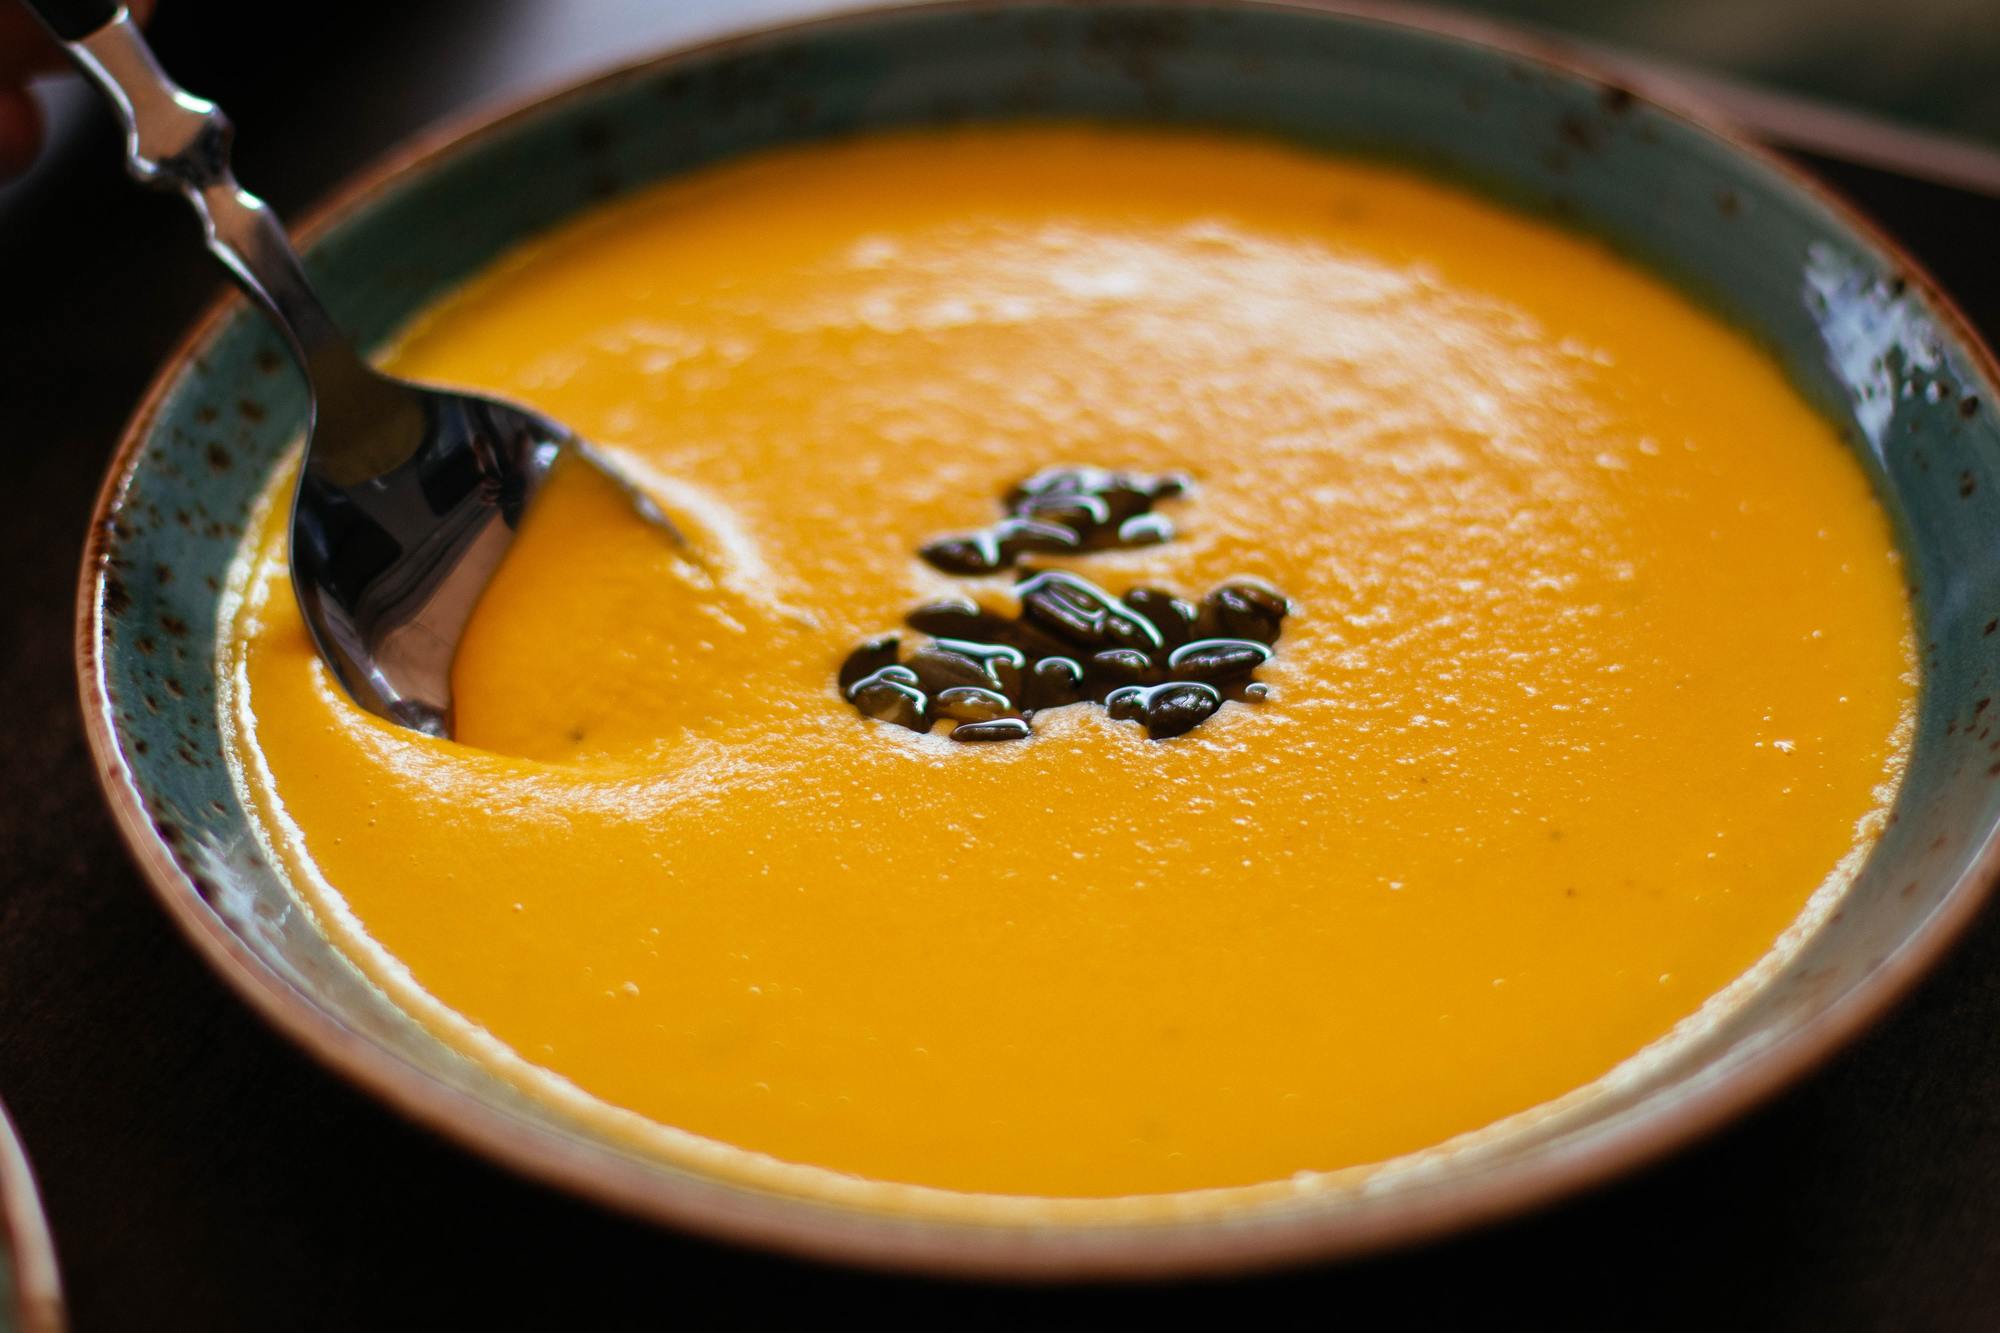 https://www.themaasclinic.com/wp-content/uploads/2020/03/shallow-focus-photography-of-squash-soup-1277483-scaled.jpg